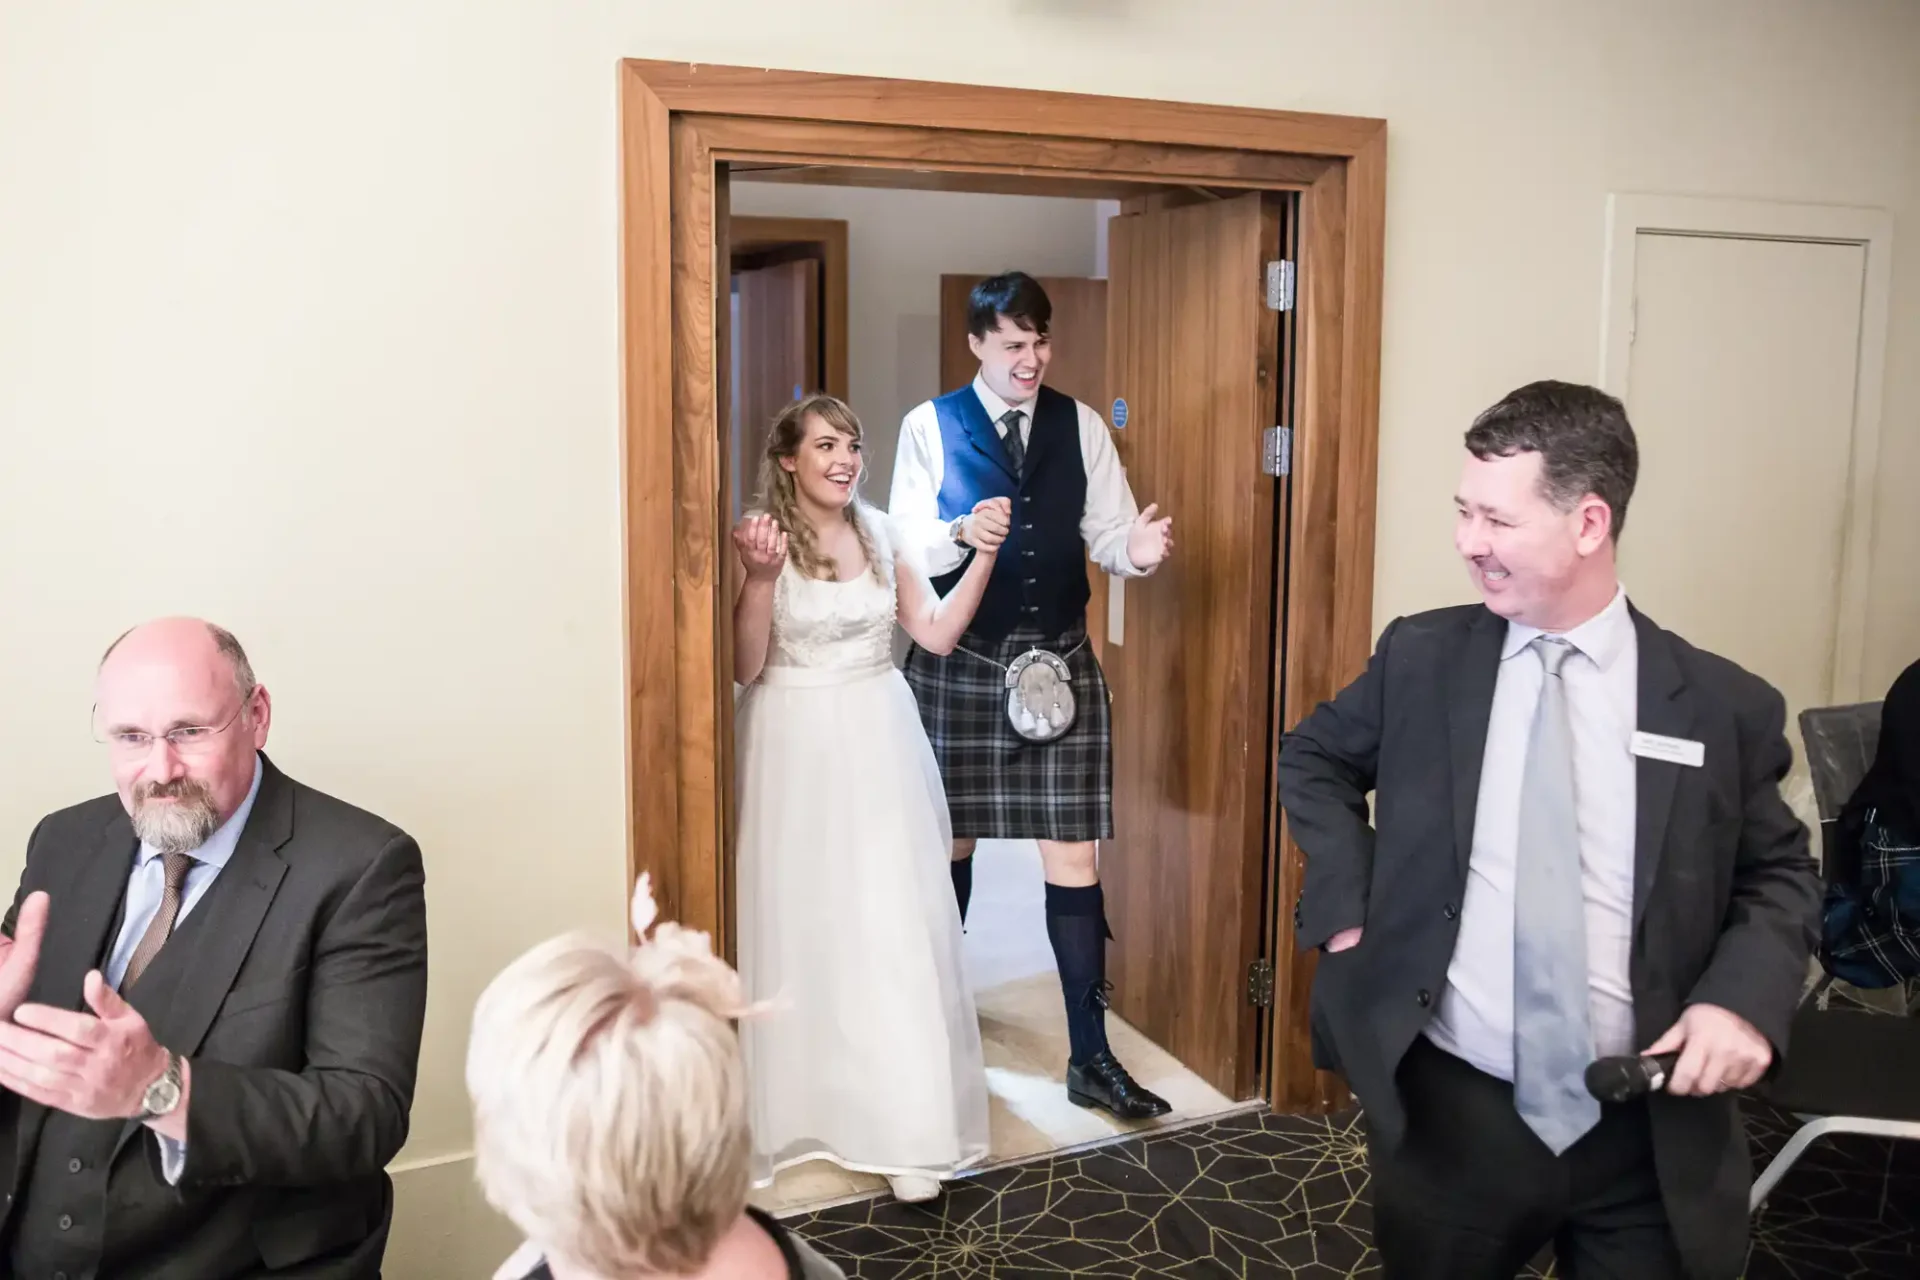 Bride and groom entering a room, the groom wearing a kilt, greeted with applause by guests.